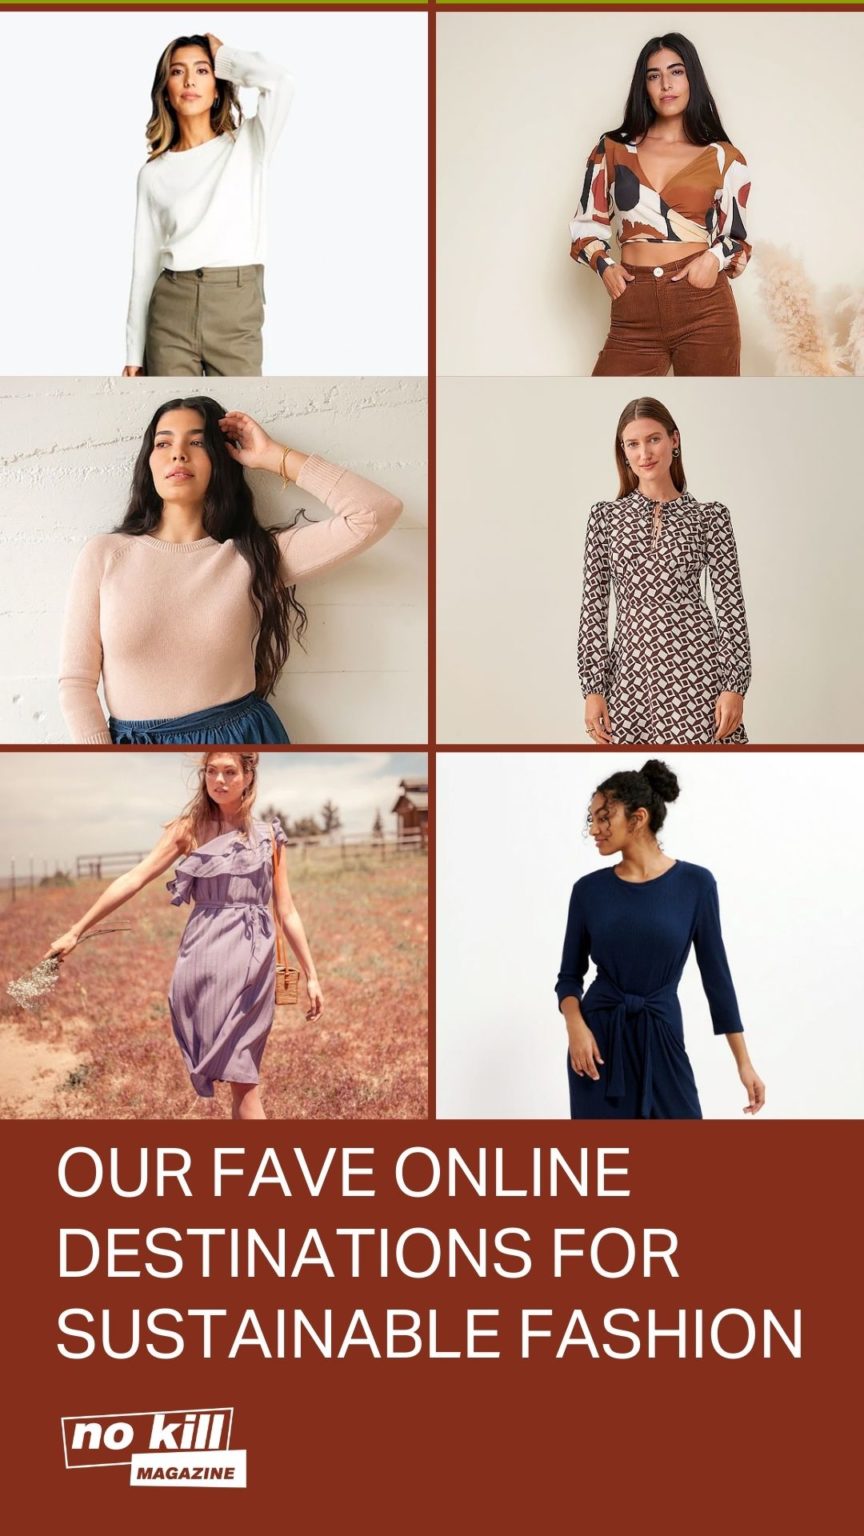 Ethical, Sustainable Dresses - Where to find them - No Kill Mag